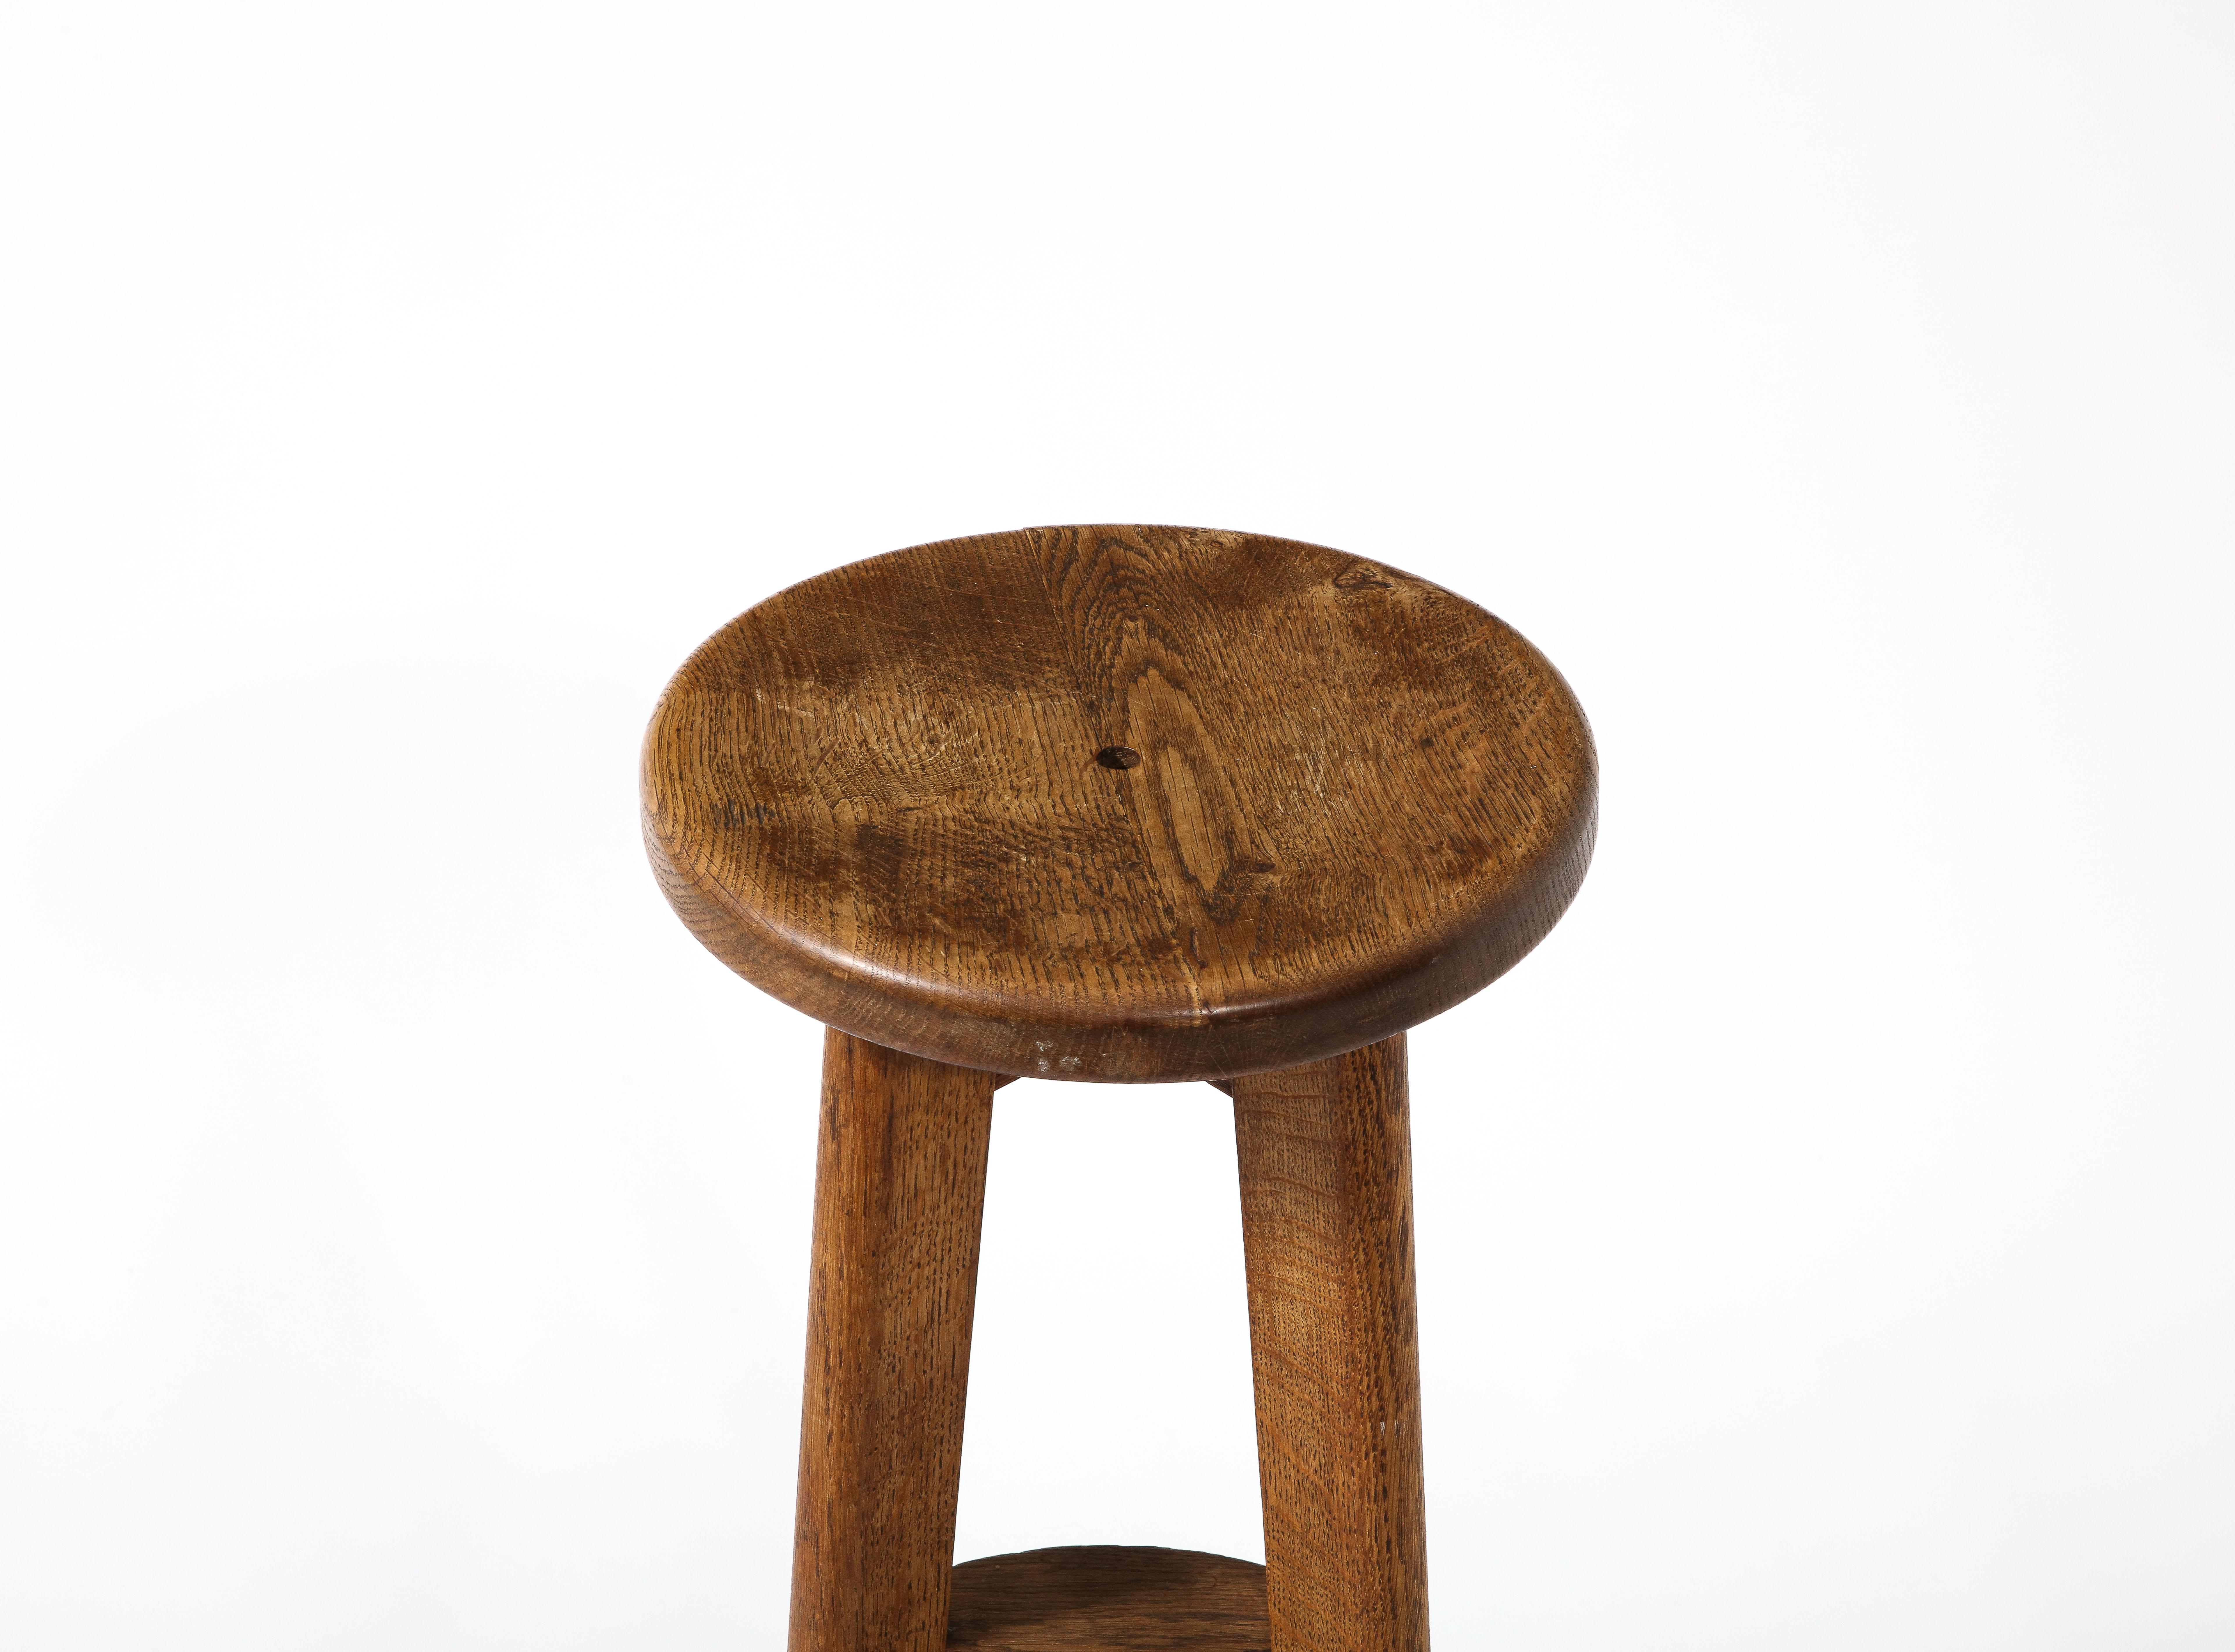 Tall Rustic Farm Stool or Pedestal in Solid Oak, France 1950's For Sale 5